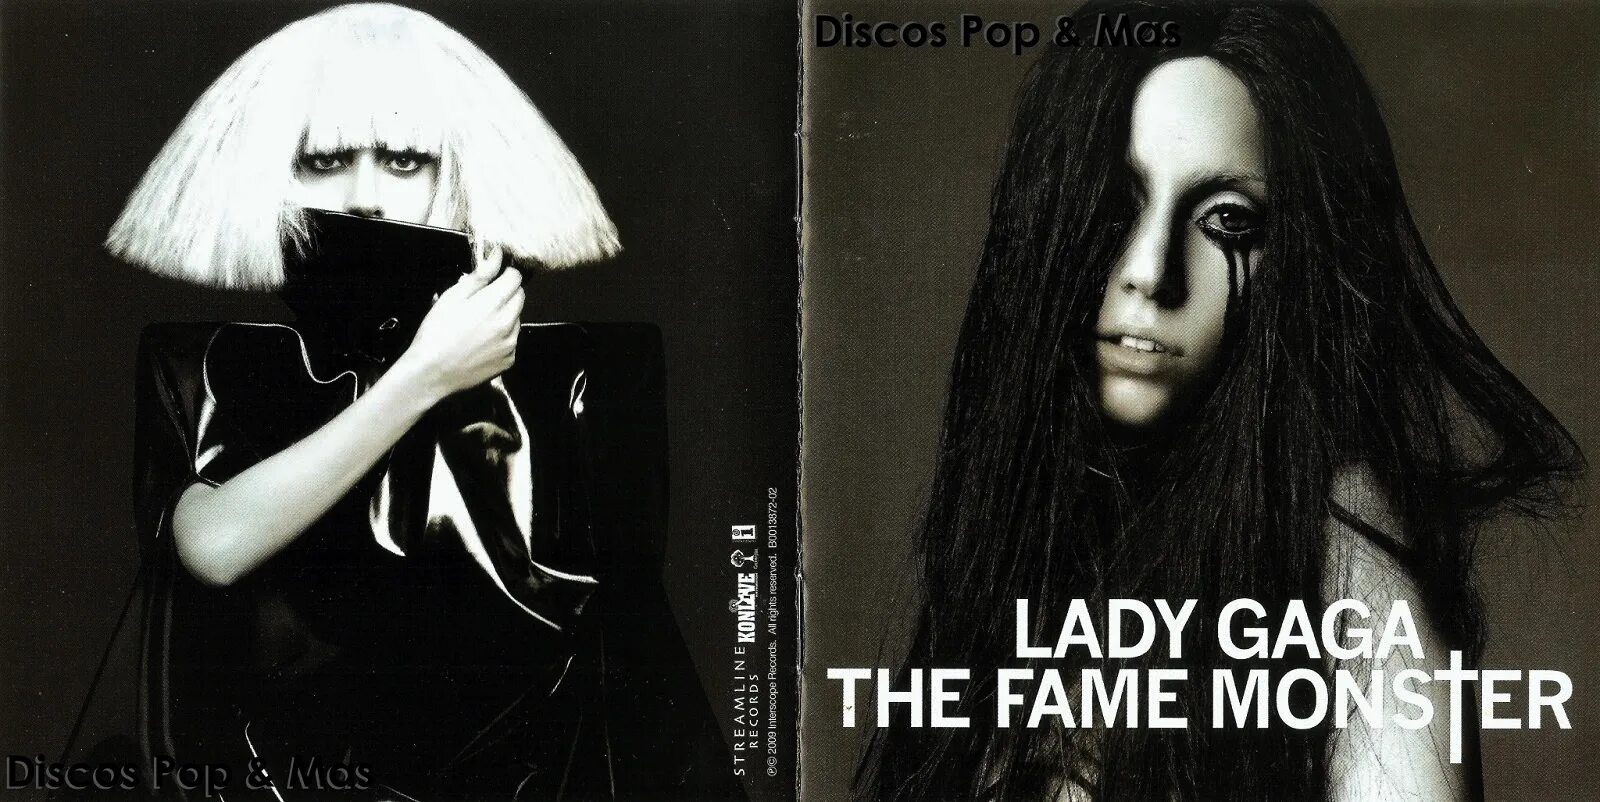 Леди гага ма ма ма. Леди Гага альбом the Fame. Lady Gaga the Fame Monster album Cover. Lady Gaga - 2009 - the Fame Monster обложка диска.